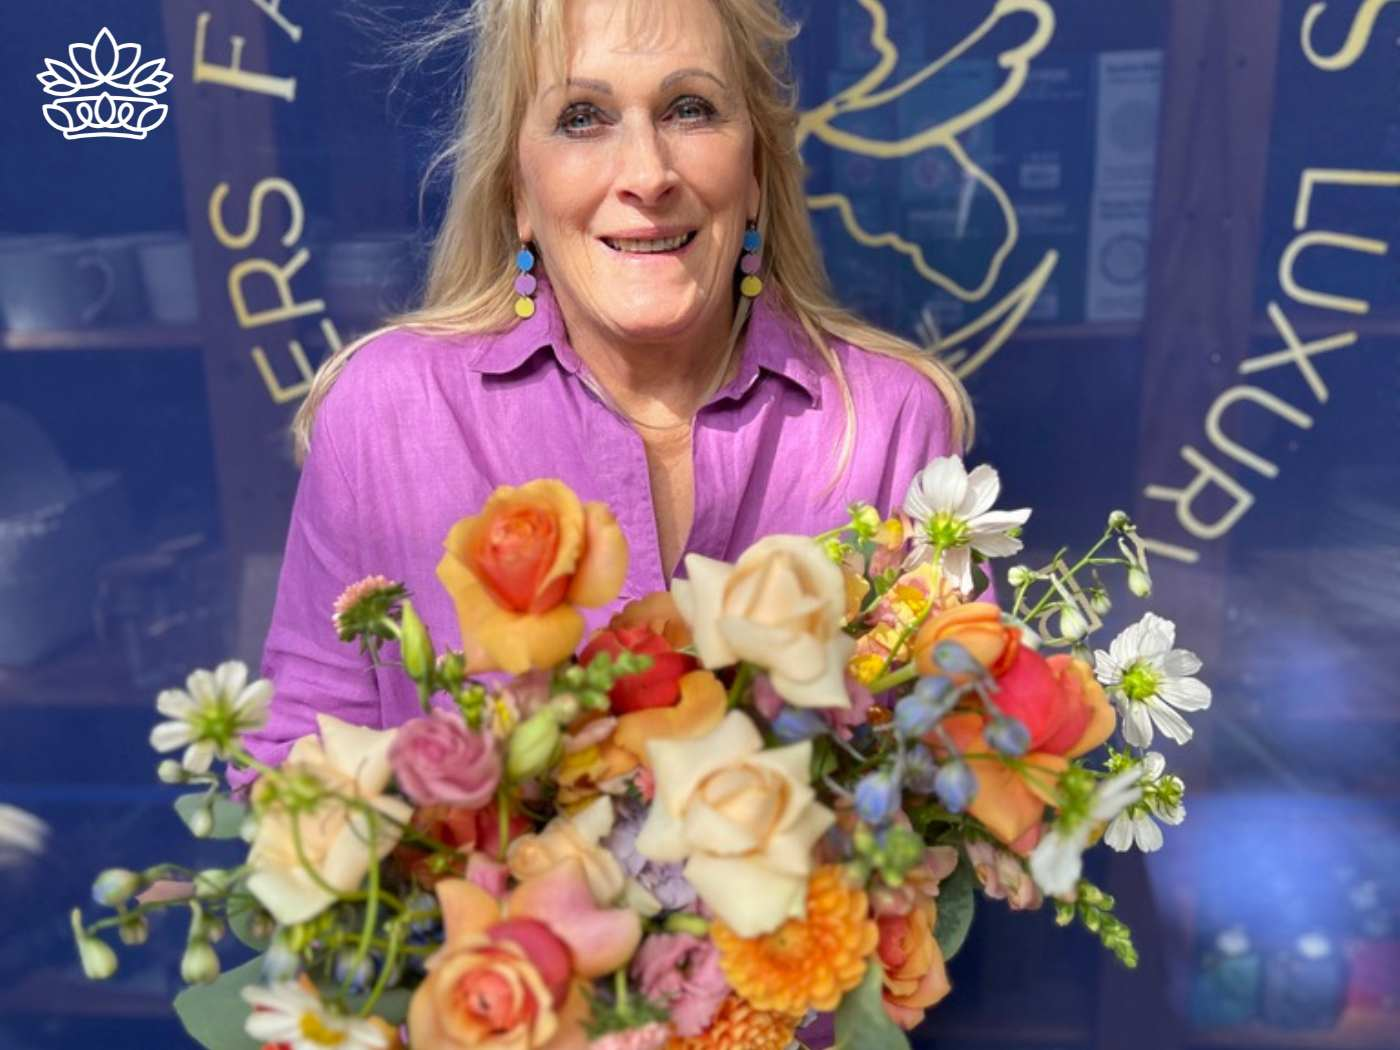 A cheerful florist in a pink blouse, radiant as she presents a colourful bouquet of roses and wildflowers, symbolizing the vibrant selection from the Flowers By Occasion Collection at Fabulous Flowers and Gifts.